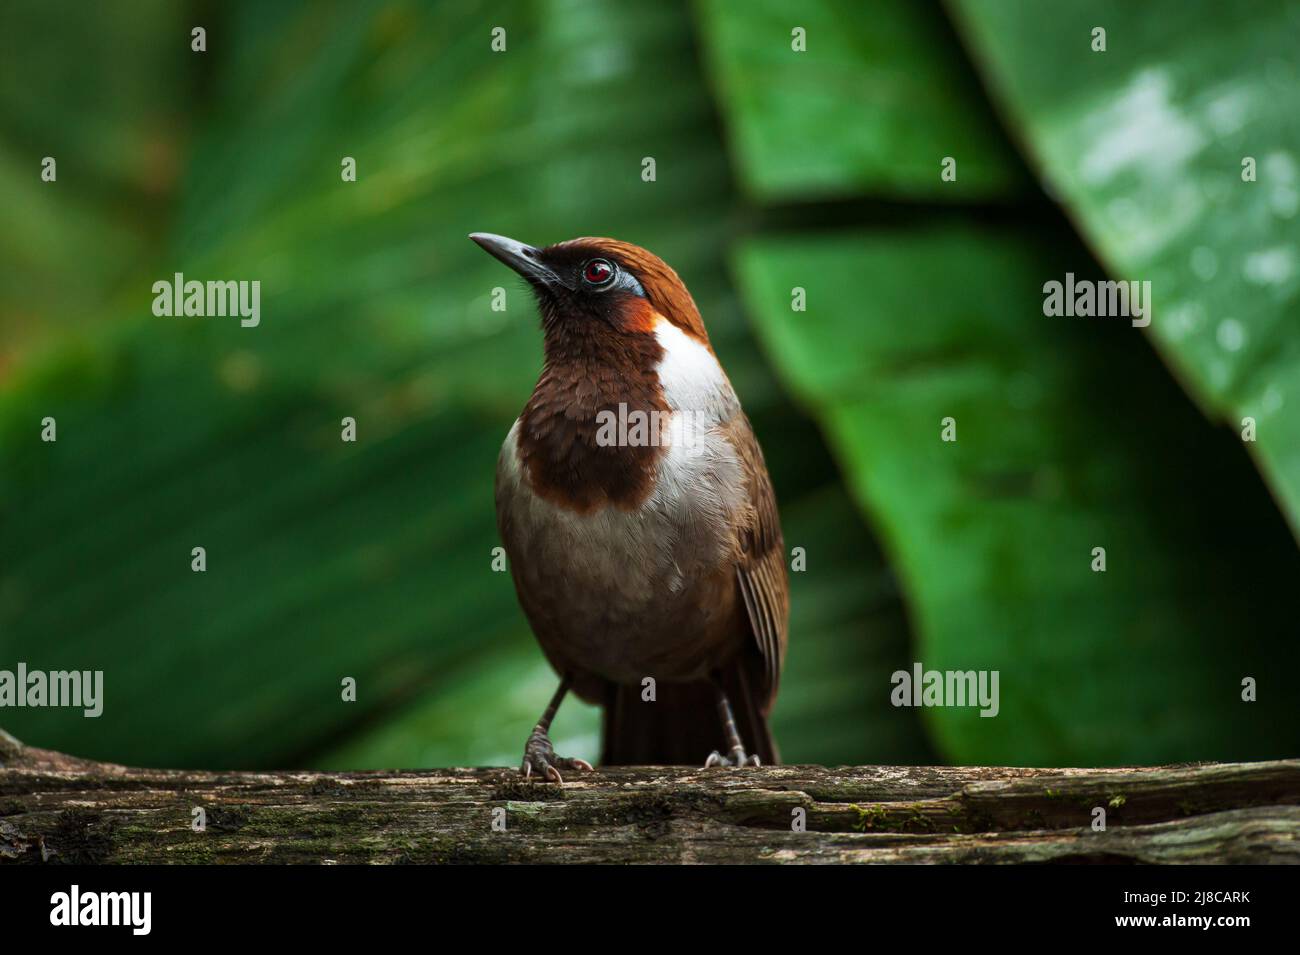 A black-throated laughingthrush perching on the log in the cloud Forest. Mae Wong National Park, Thailand. Focus on the bird's eye. Stock Photo